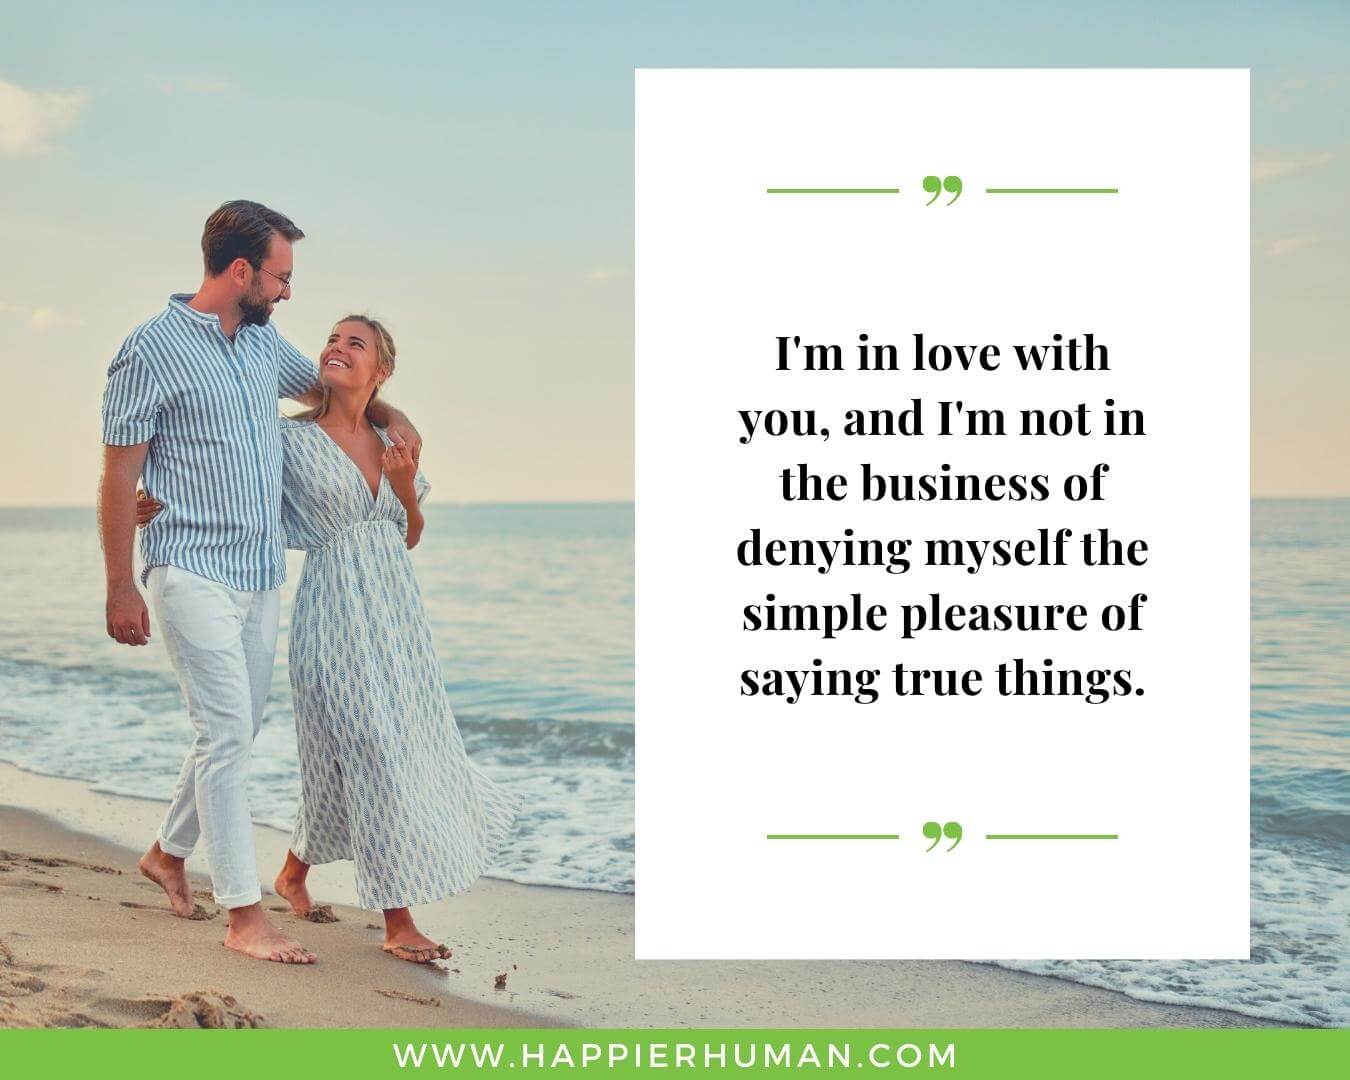 True Love Quotes- “I'm in love with you, and I'm not in the business of denying myself the simple pleasure of saying true things.” 